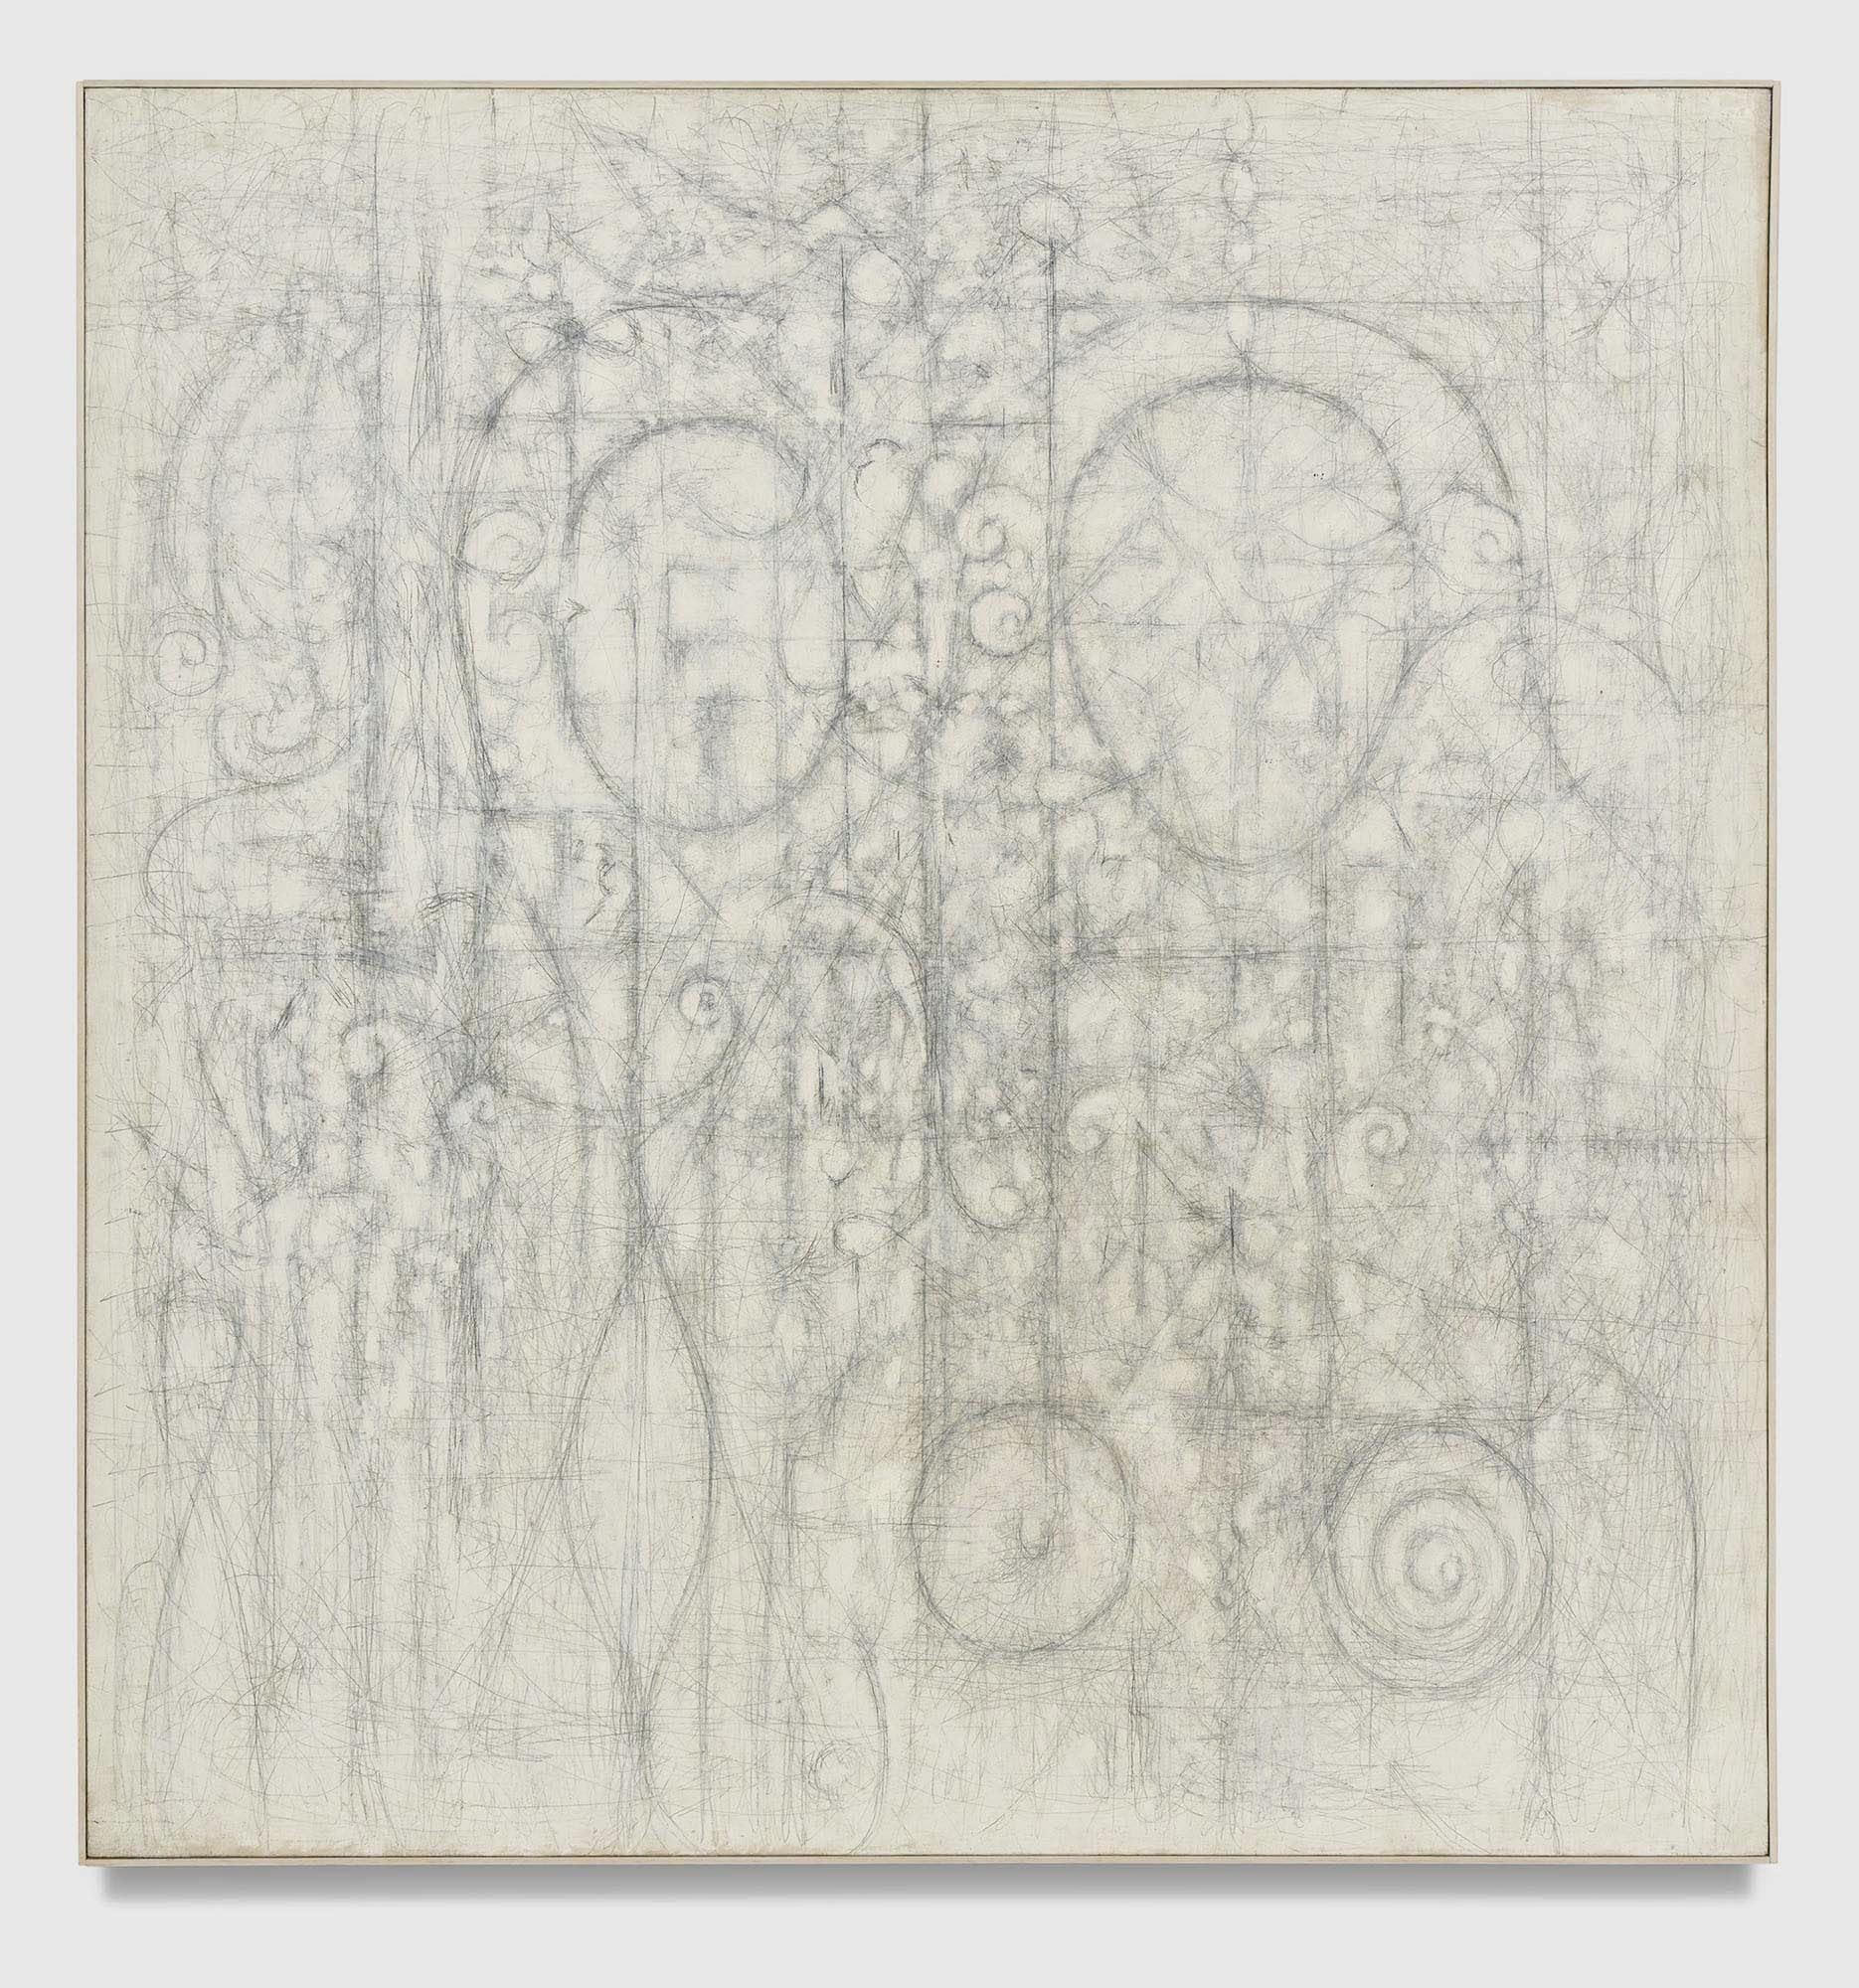 Quiet Lovers
1950–51
Oil and graphite on linen
53 1/4 x 50 1/4 in. (135.3 x 127.6 cm)
 – The Richard Pousette-Dart Foundation